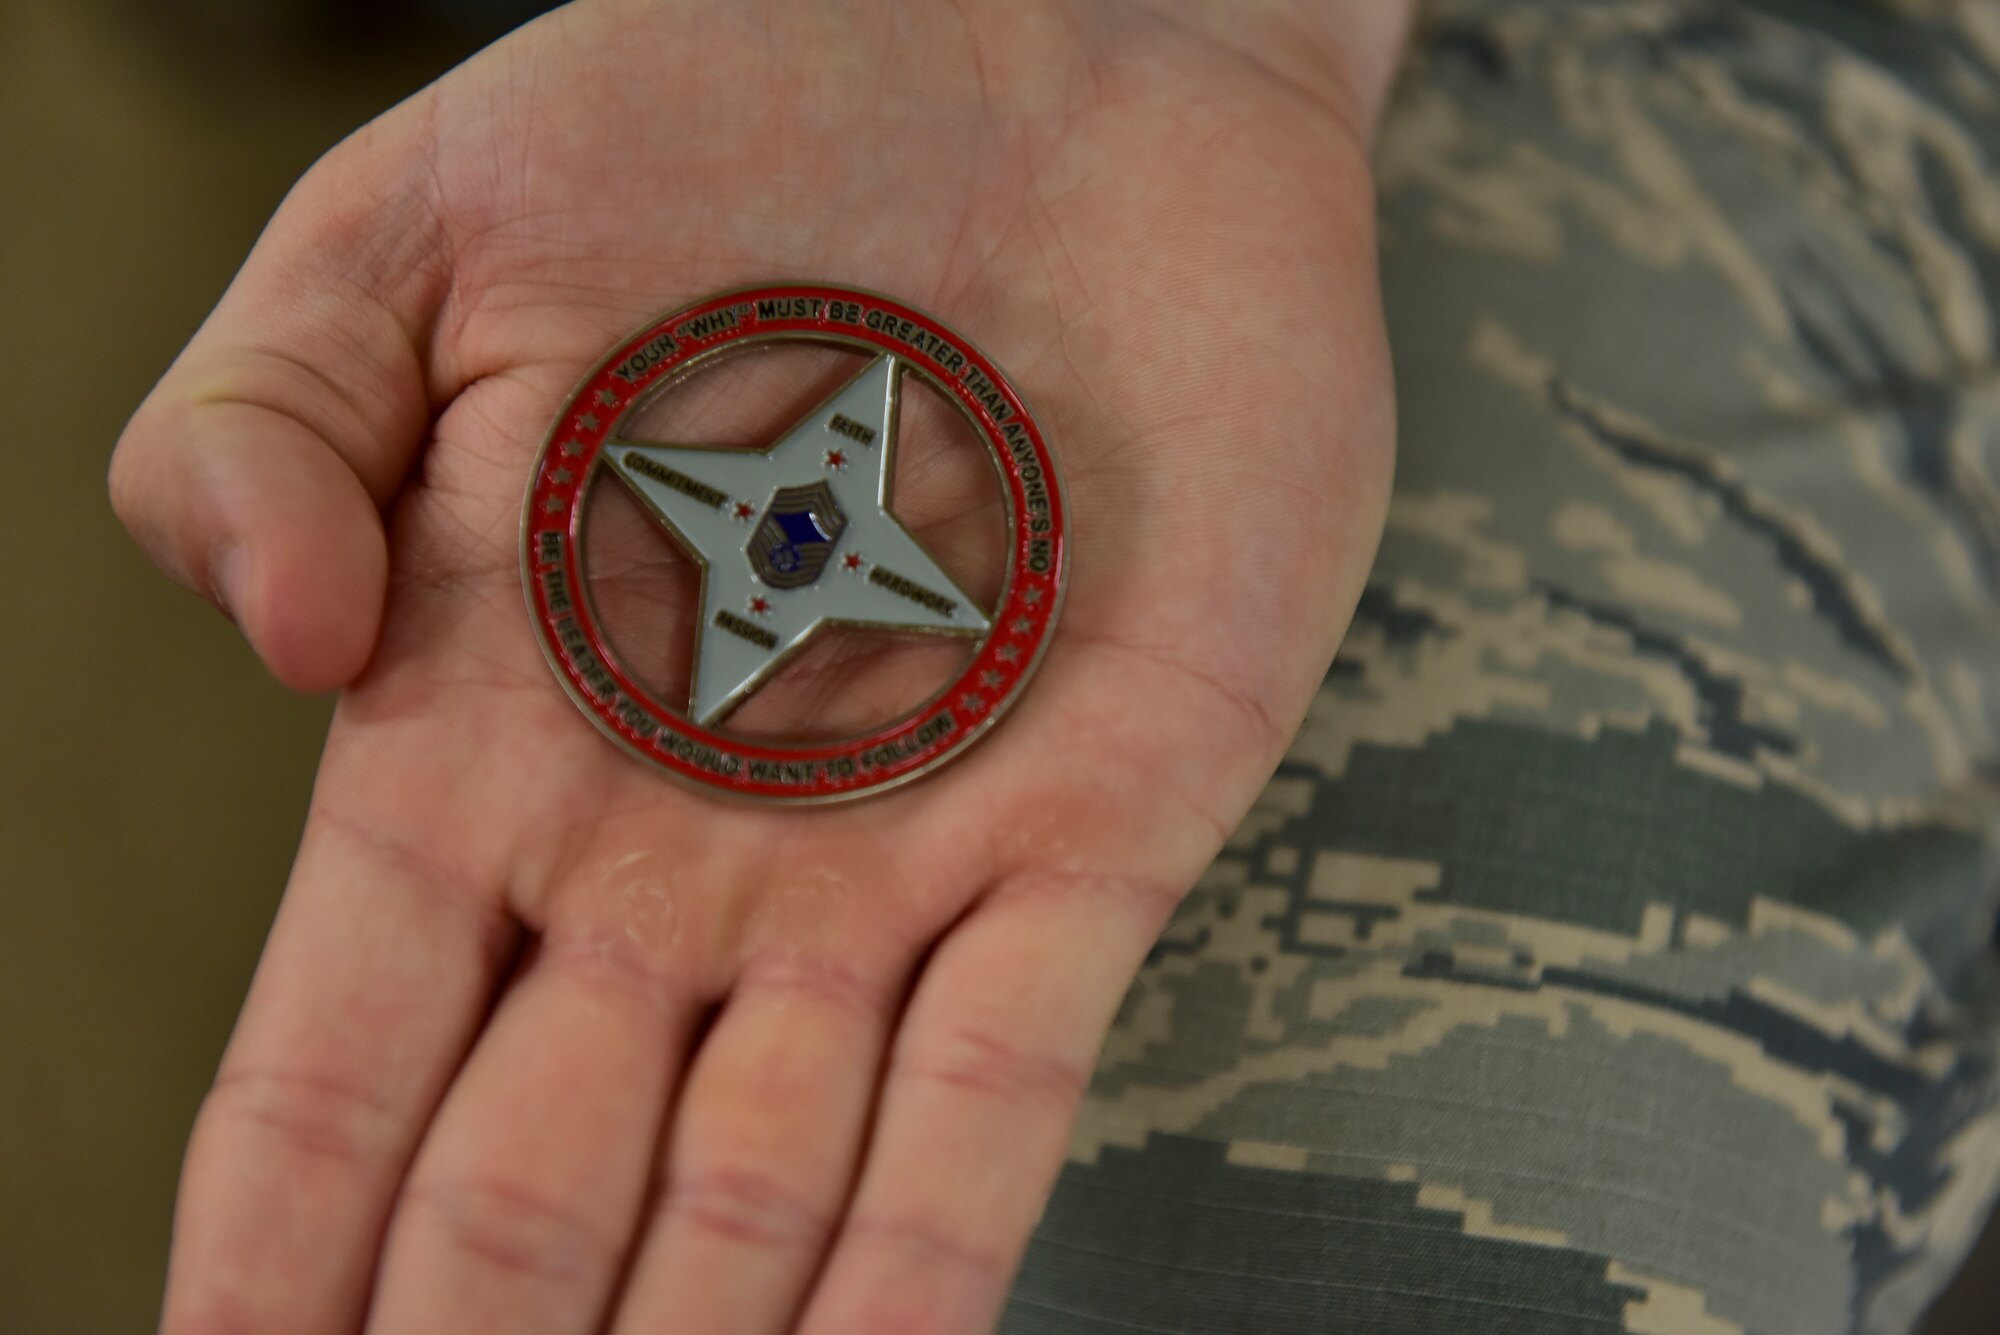 U.S. Air Force Staff Sgt. Brandon Nickell, 8th Intelligence Squadron intelligence analyst, holds a coin he received for assisting a wingman experiencing a medical emergency at Joint Base Pearl Harbor-Hickam, Hawaii, Feb. 25, 2019. Nickell’s actions saved the life of Chief Master Sgt. James Worrell, 56th Air Communications Squadron superintendent. (U.S. Air Force photo by Staff Sgt. Eboni Prince)